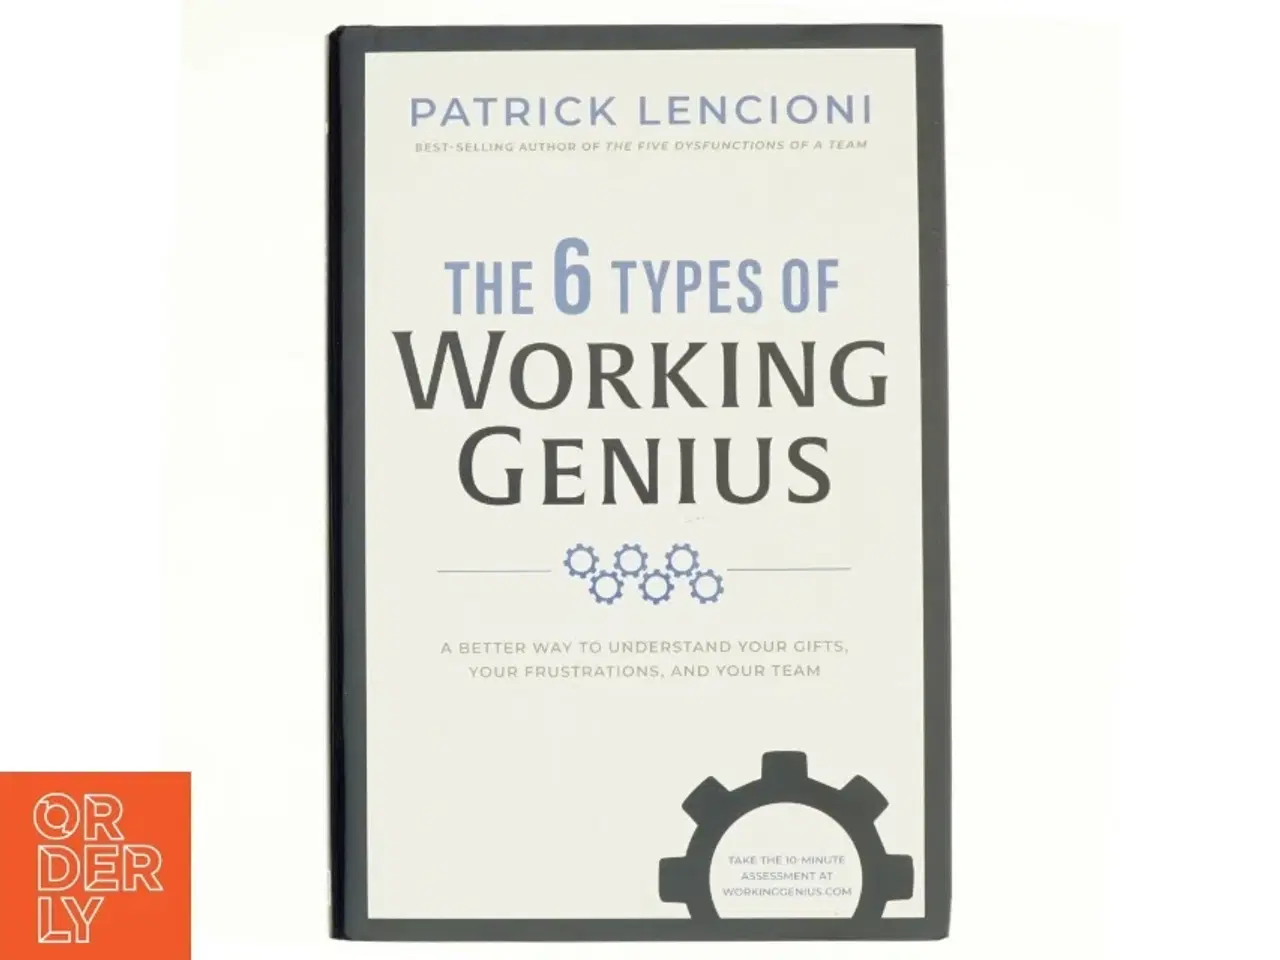 Billede 1 - The 6 types of working genius : a better way to understand your gifts, your frustrations, and your team af Patrick Lencioni (1965-) (Bog)